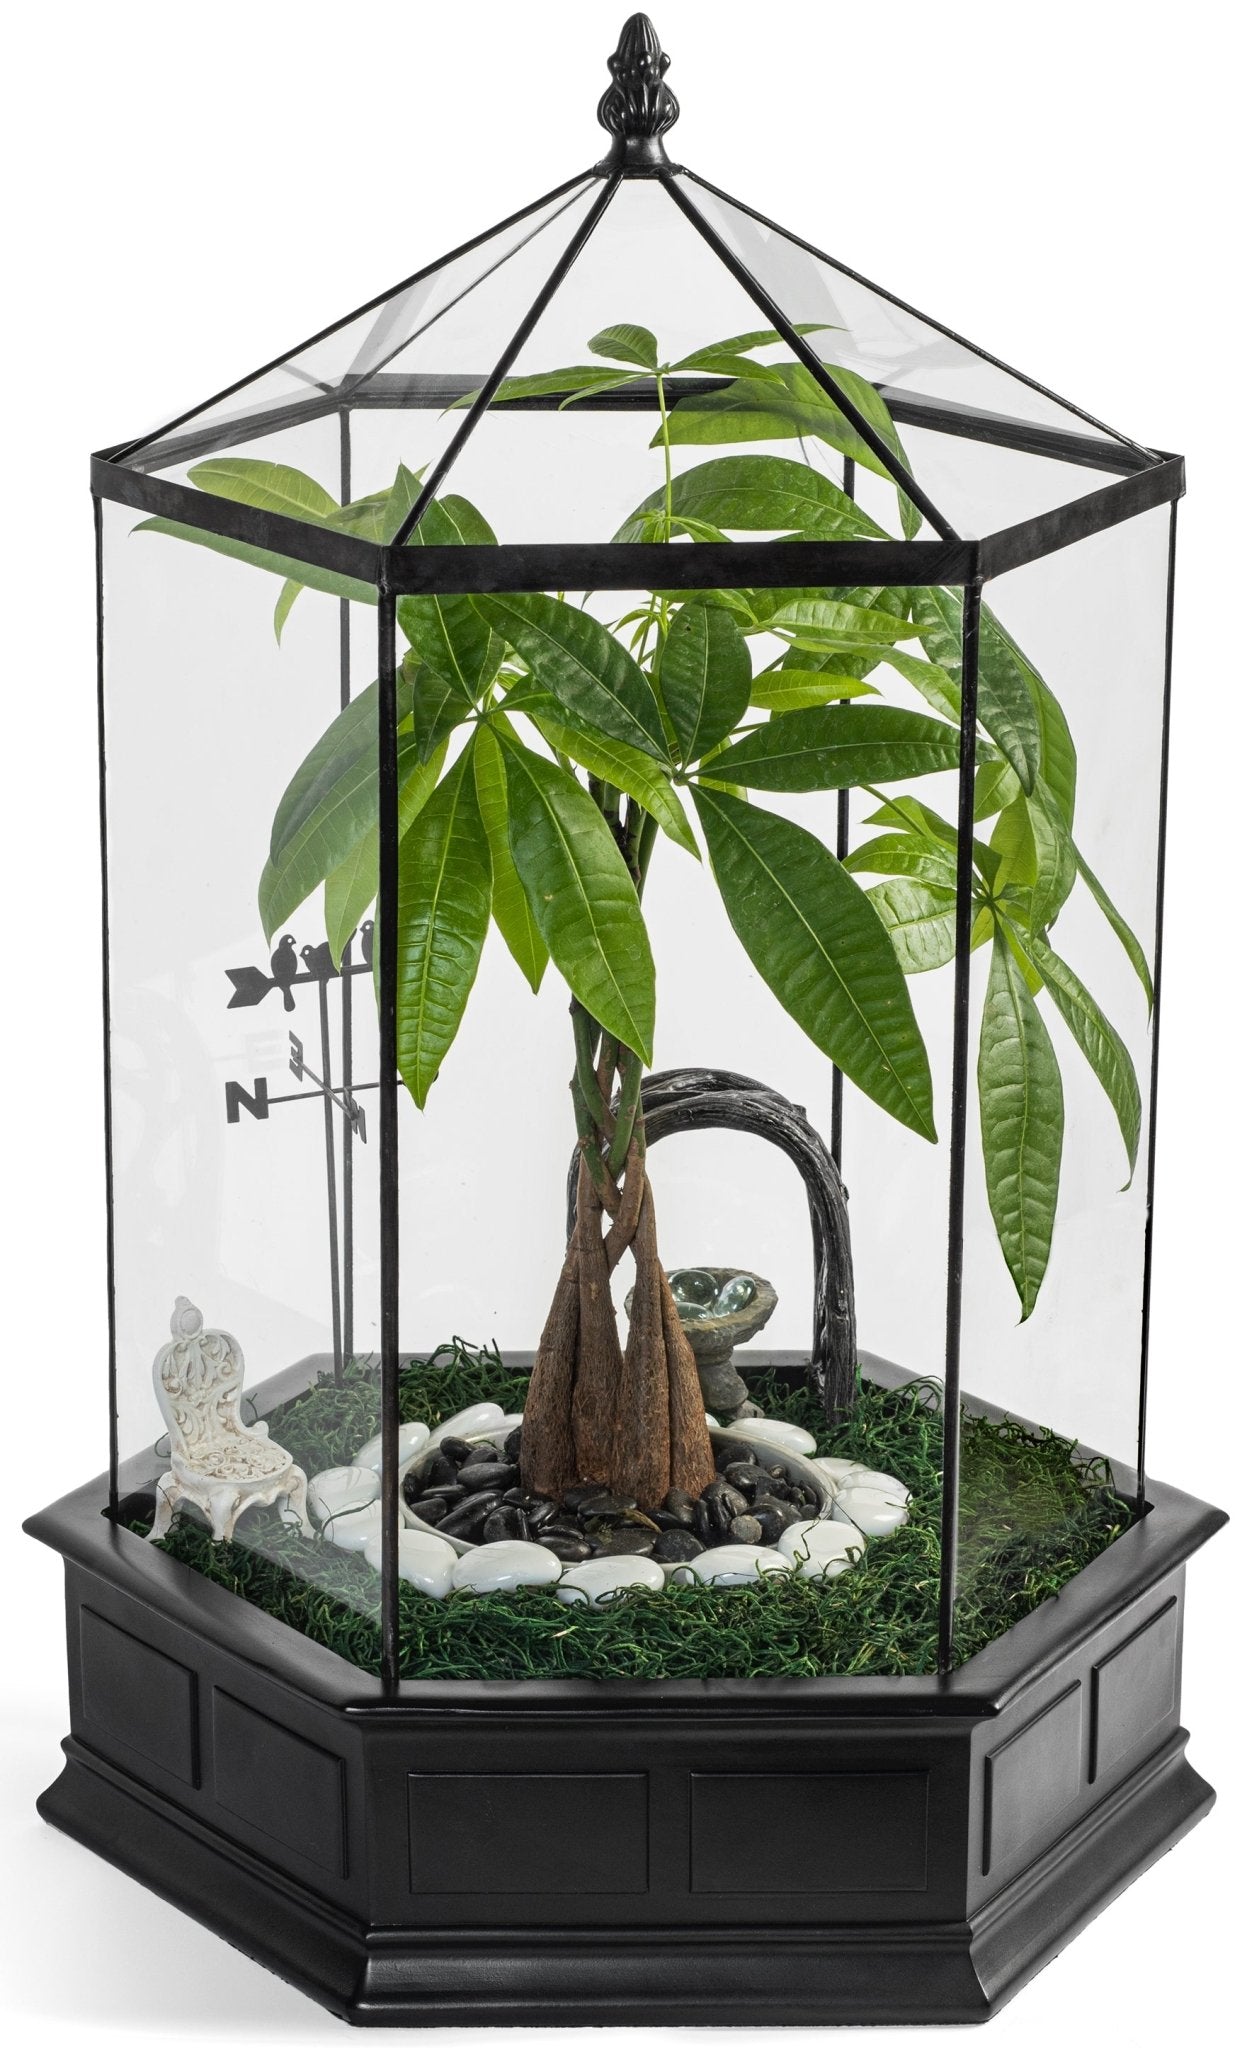 H Potter Six Sided Glass Terrarium Wardian Case Plant Container Large and Tall